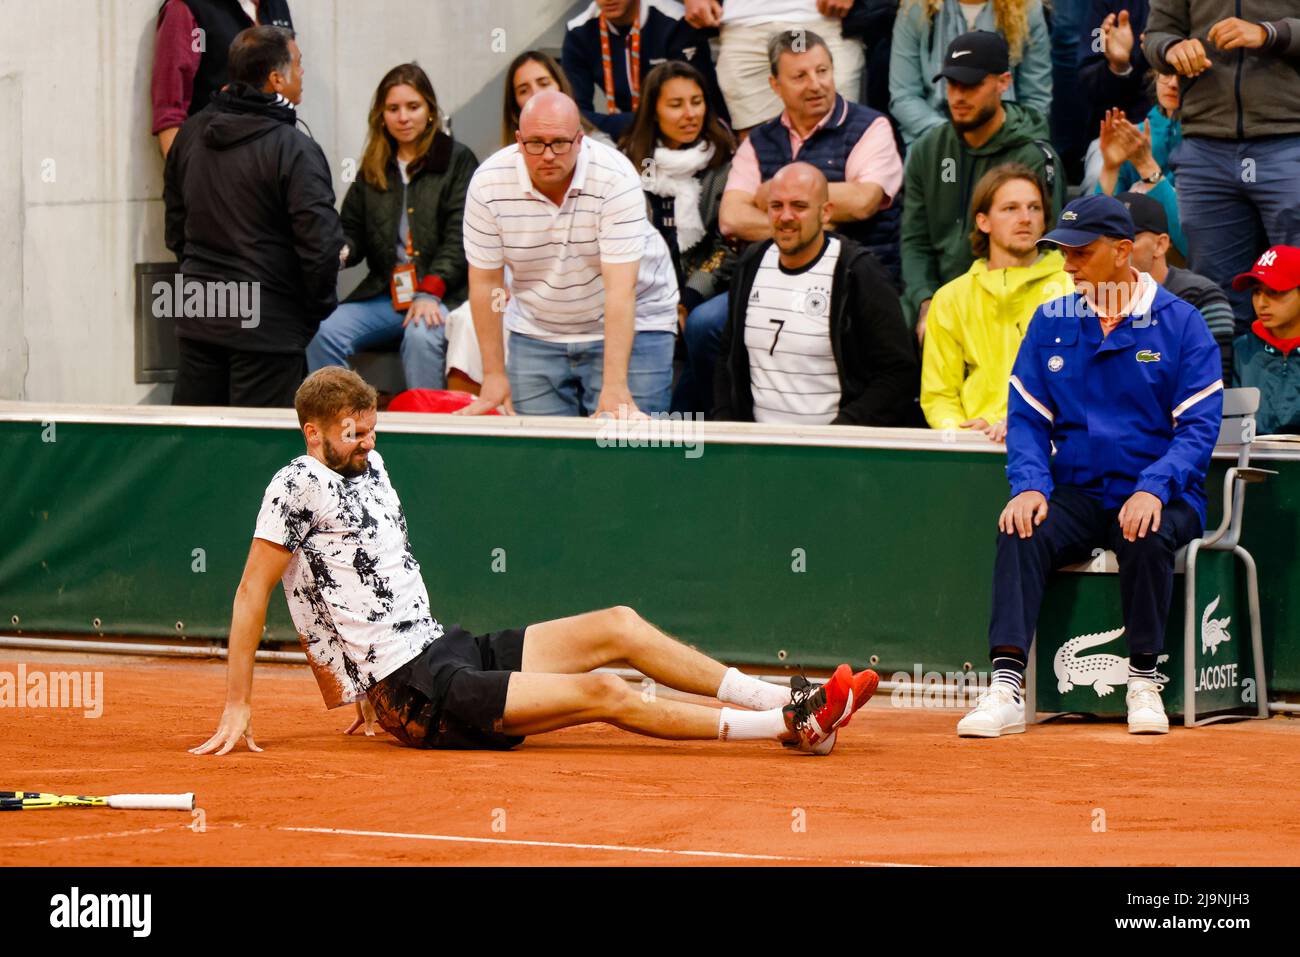 Paris, France. 24th May, 2022. Tennis: Grand Slam/ATP Tour - French Open,  men's singles, 1st round, Carballes Baena (Spain) - Otte (Germany). Oscar  Otte sits on the floor plagued by cramps. Credit: